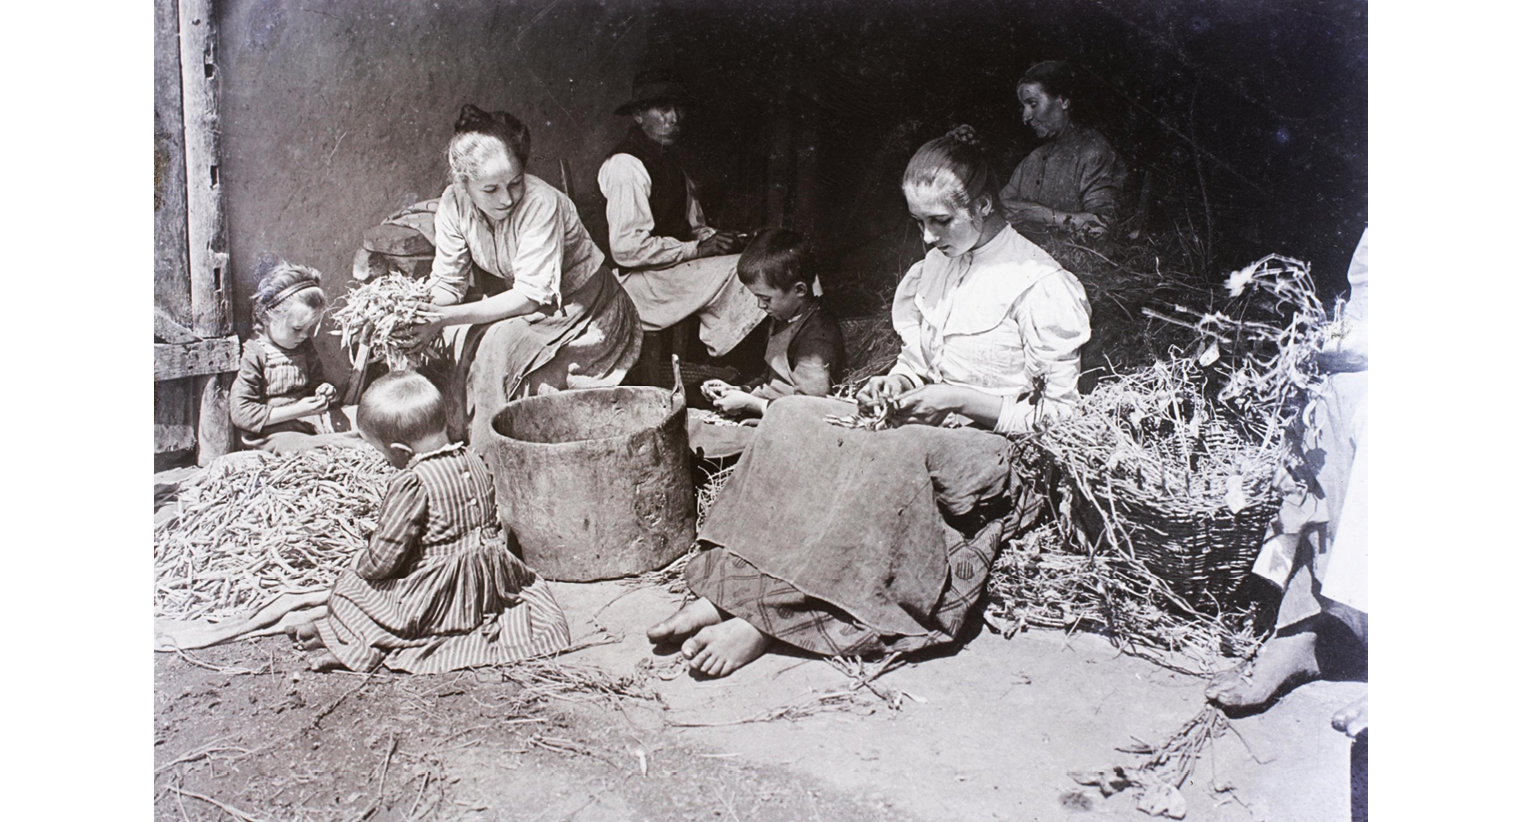 A black and white photograph from 1908 Hungary; depicts farmers in the process of bean peeling; on the left, a woman grabs a handful of bean pods while two children peel from a pile next to her; in the center rests a ceramic container for the beans; on the right-hand side of the picture, a boy peels beans as he sits next to the container, to his left sits a young woman peeling beans on top of her skirt; at the back an older man and woman peel beans sitting in stools.